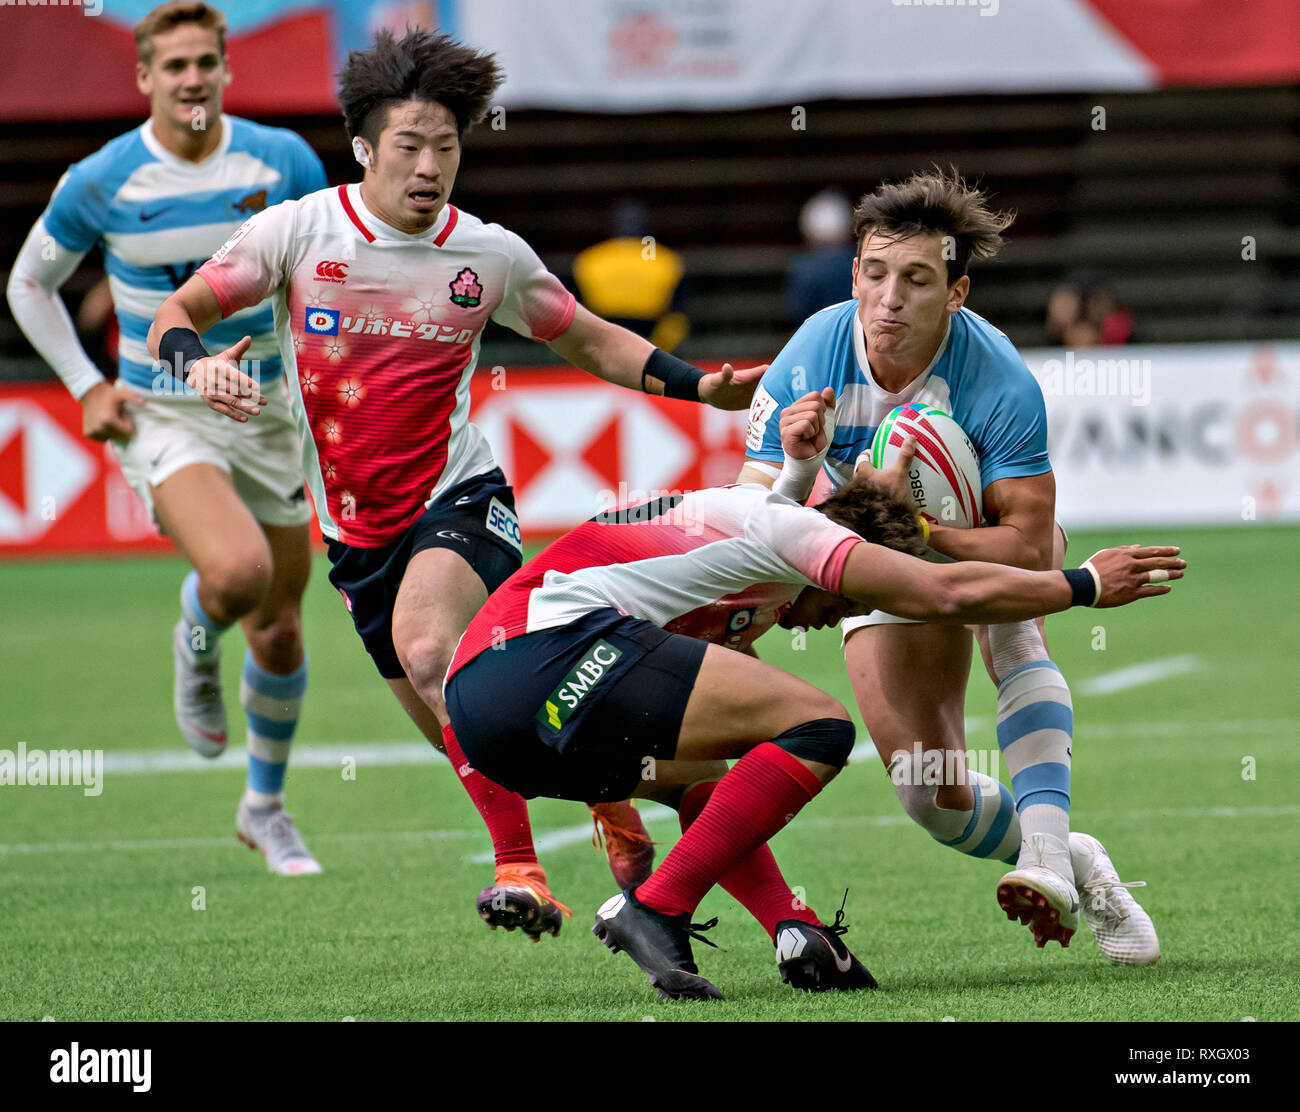 Vancouver, Canada. 9th Mar, 2019. Luciano Gonzalez (1st R) of Argentina vies with Taiki Koyama (2nd L) and Kazuhiro Goya (2nd R) of Japan during the HSBC World Rugby Seven Series at BC Place in Vancouver, Canada, March 9, 2019. Credit: Andrew Soong/Xinhua/Alamy Live News Stock Photo